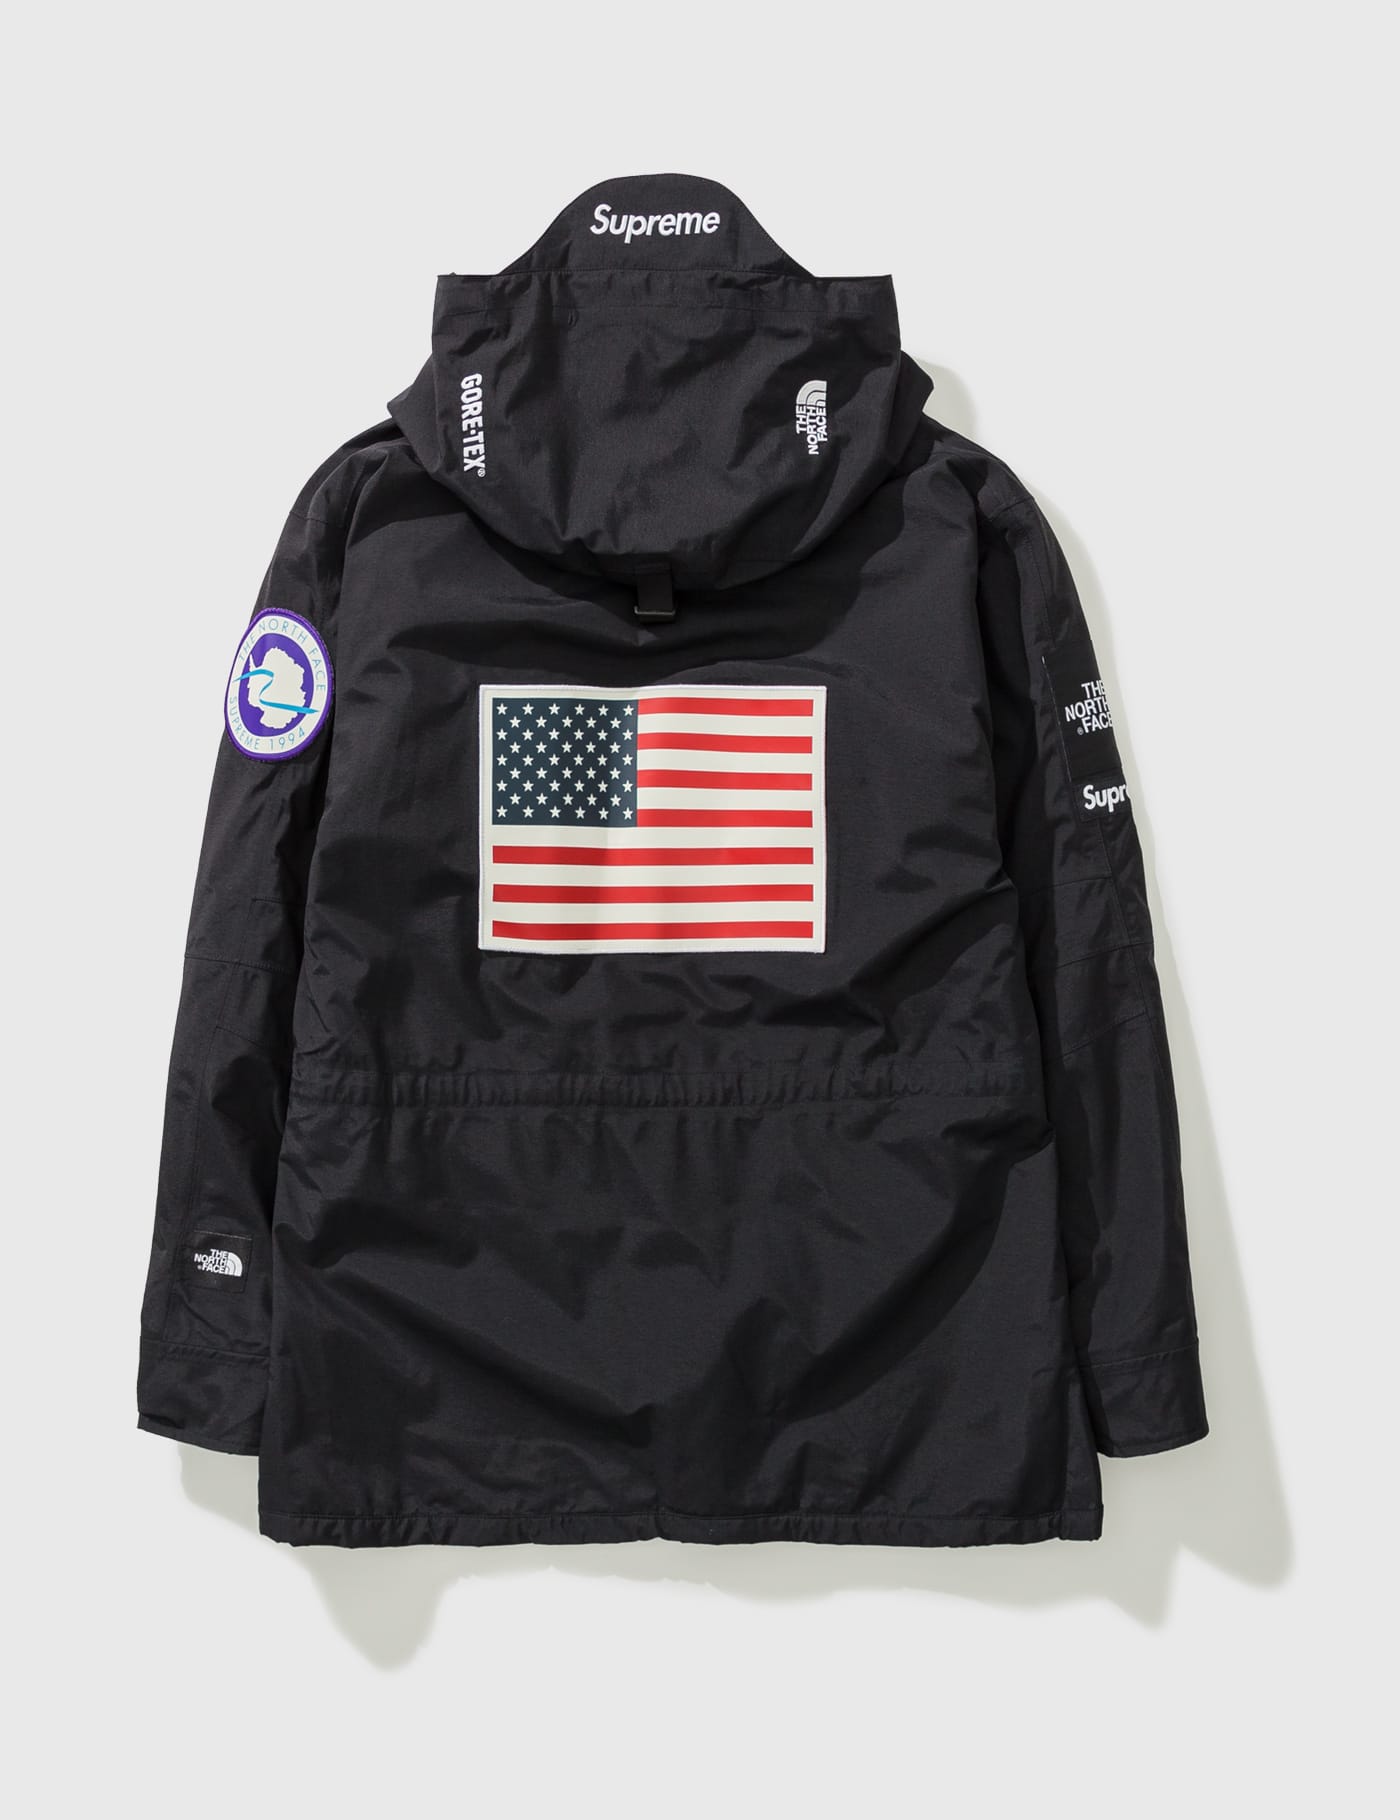 Supreme x The North Face Pullover Jacket